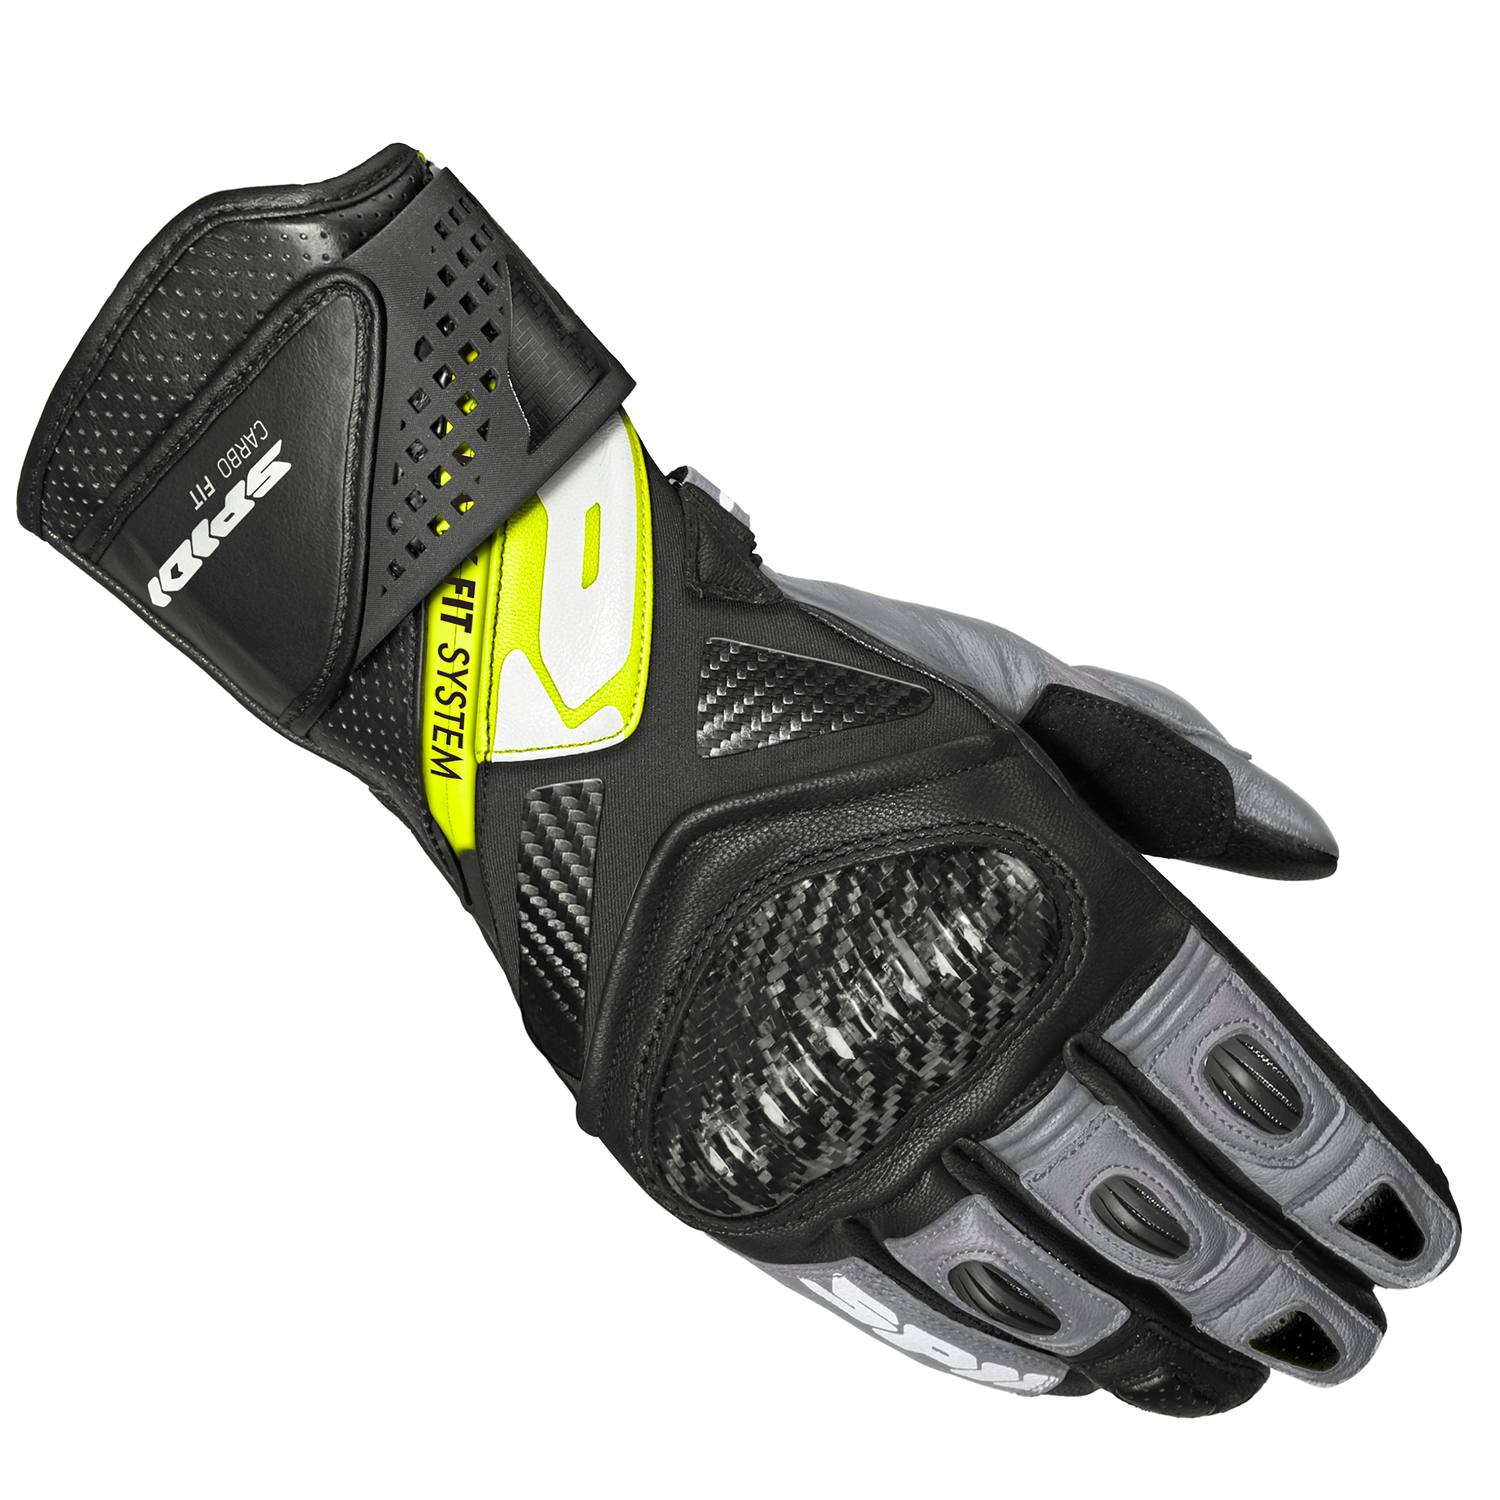 Image of Spidi Carbo Fit Gloves Black Fluorescente Yellow Size 2XL EN